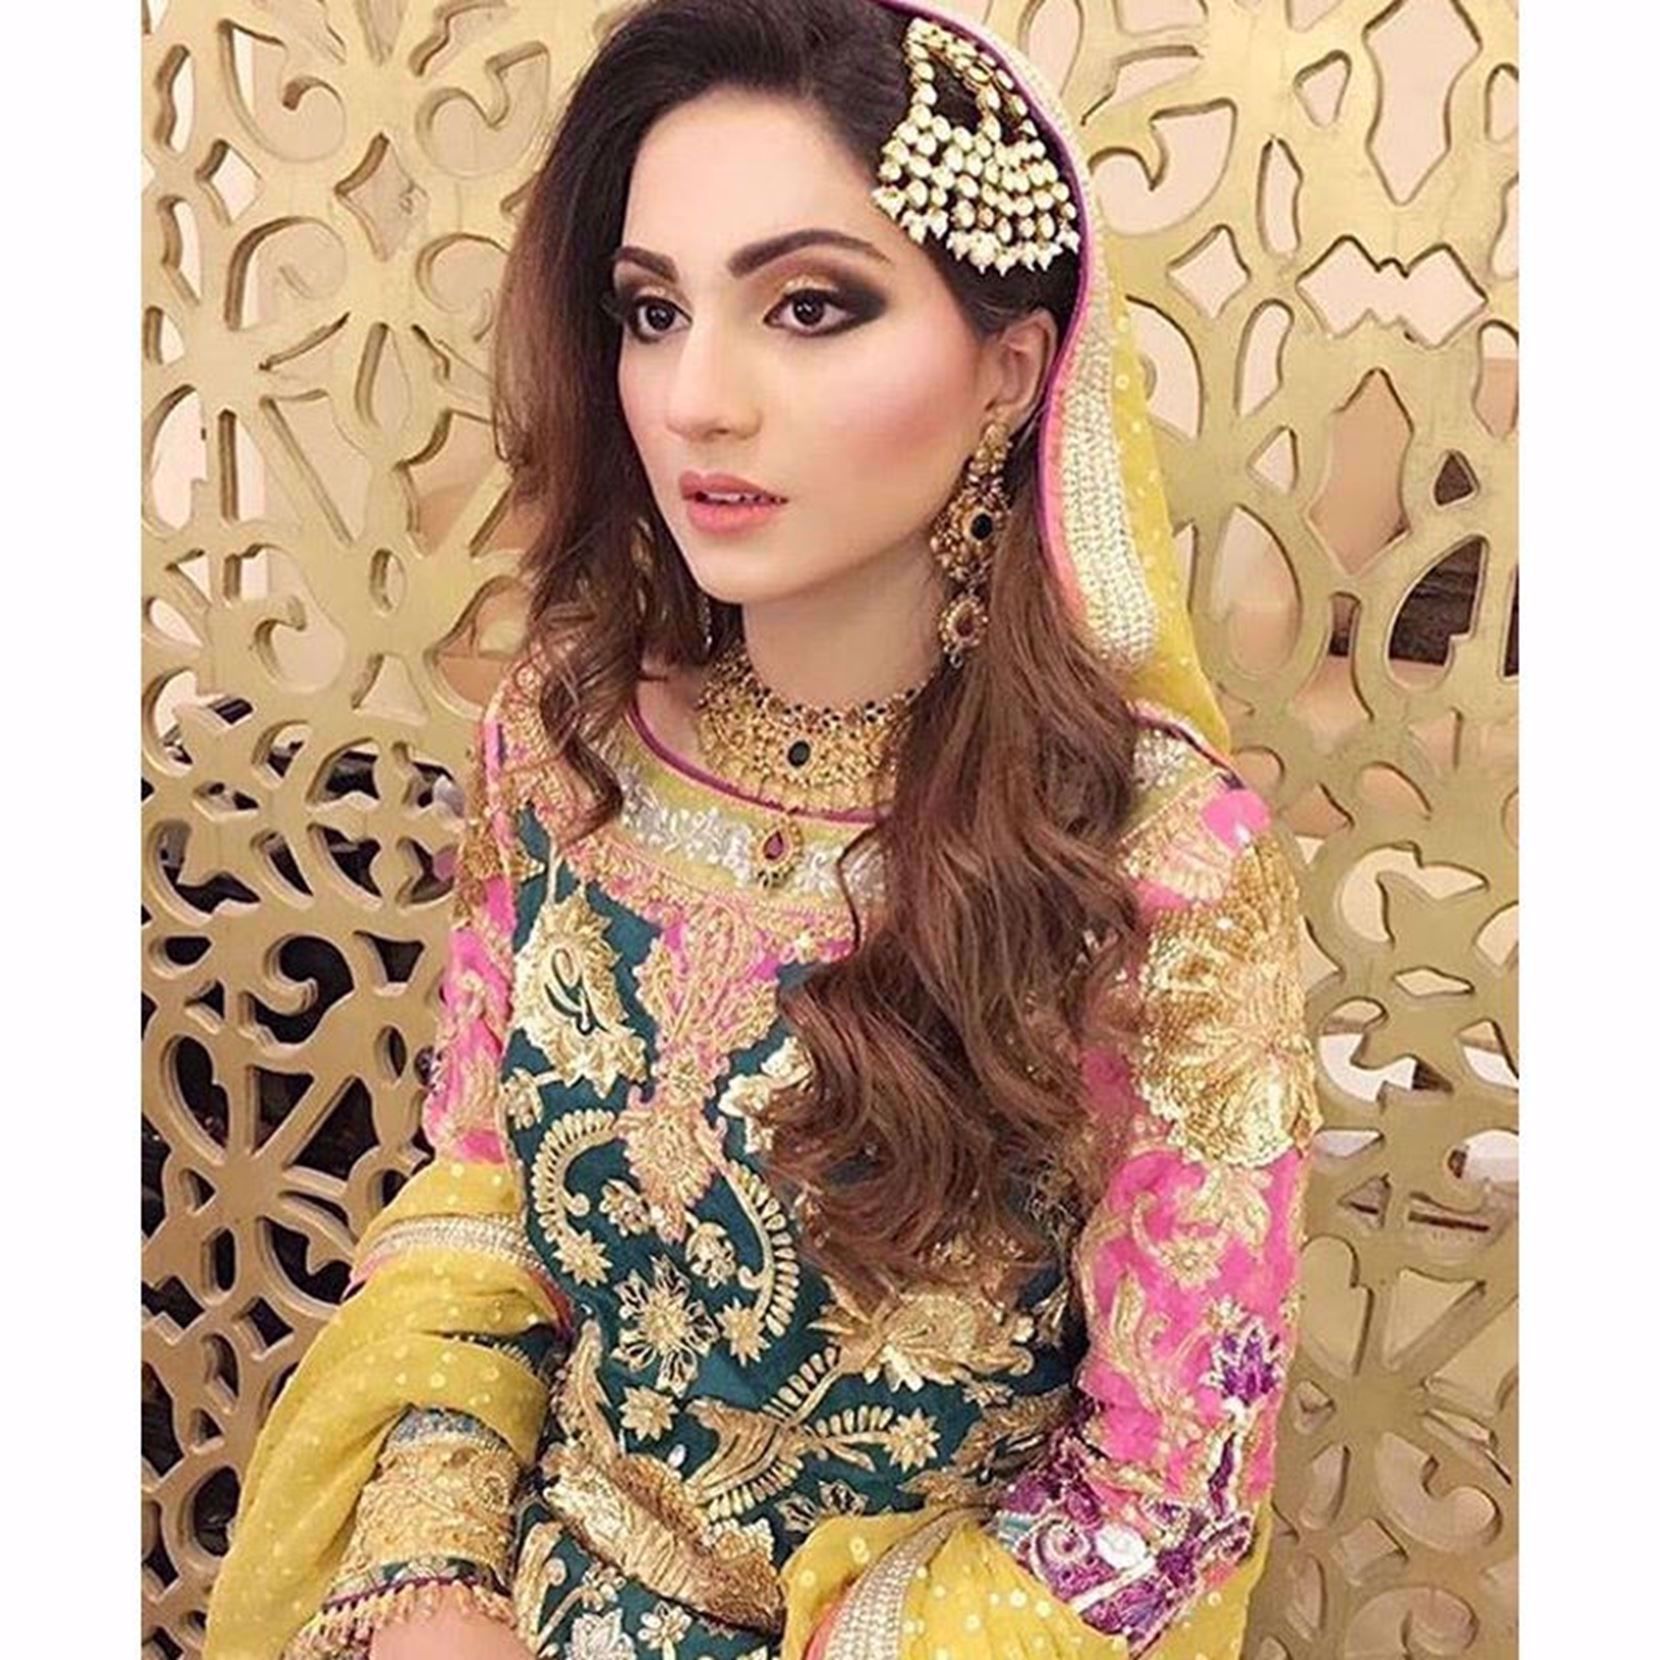 Picture of NAYAB MIANOOR LOOKS RADIANT IN ORNATE ONYX